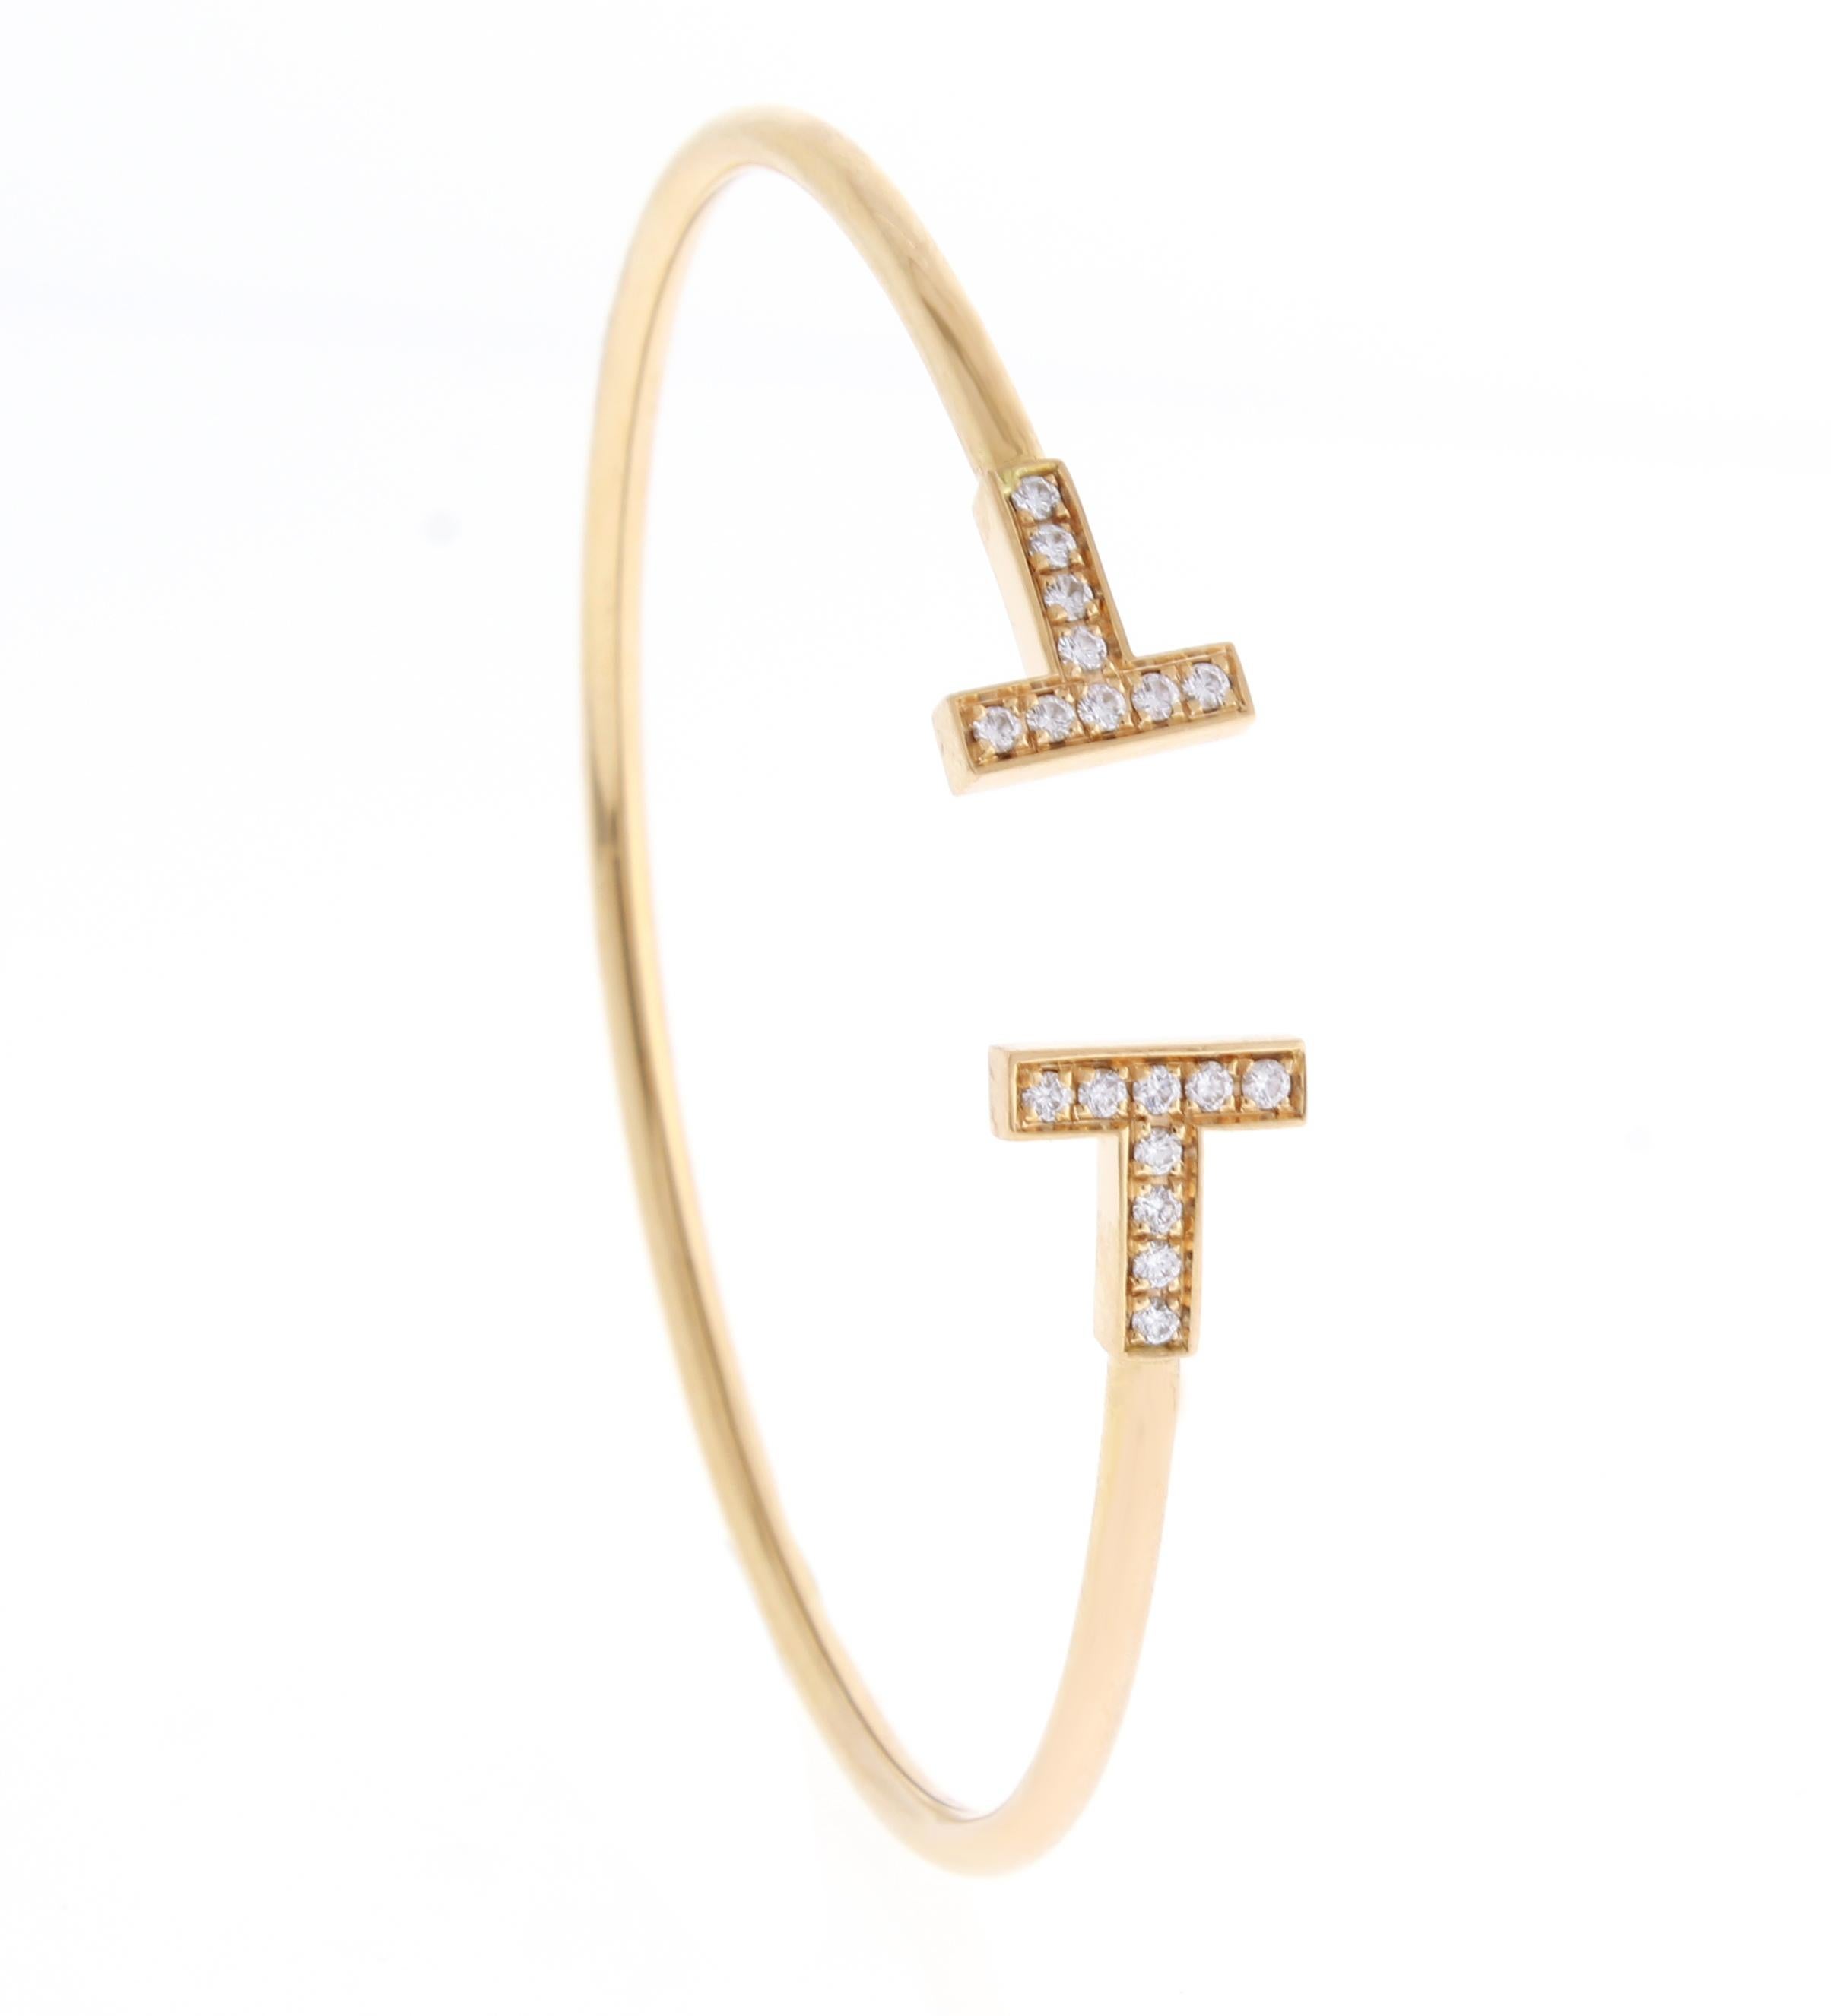 Graphic angles and clean lines blend to create the beautiful clarity of the Tiffany T collection. Brilliant diamonds enhance this bracelet's timeless elegance.

18 karat  pink gold with round brilliant diamonds
Size medium
Fits wrists up to